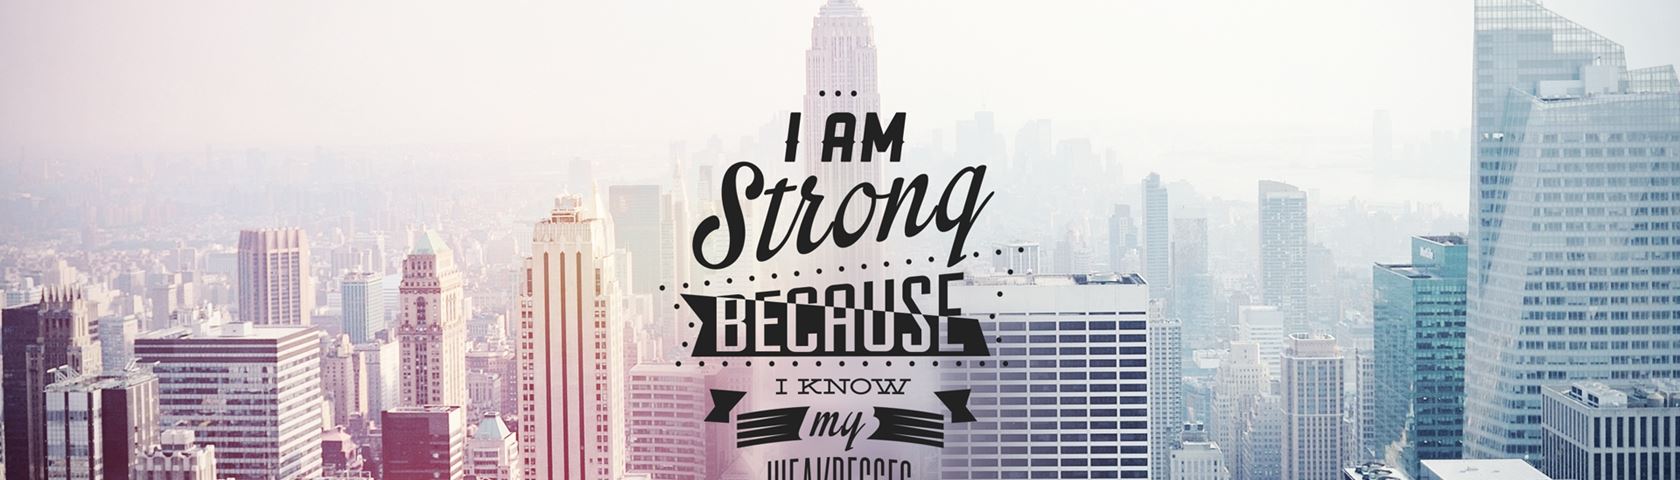 Motivational Wallpaper - Am Strong Because I Know My Weakness - HD Wallpaper 